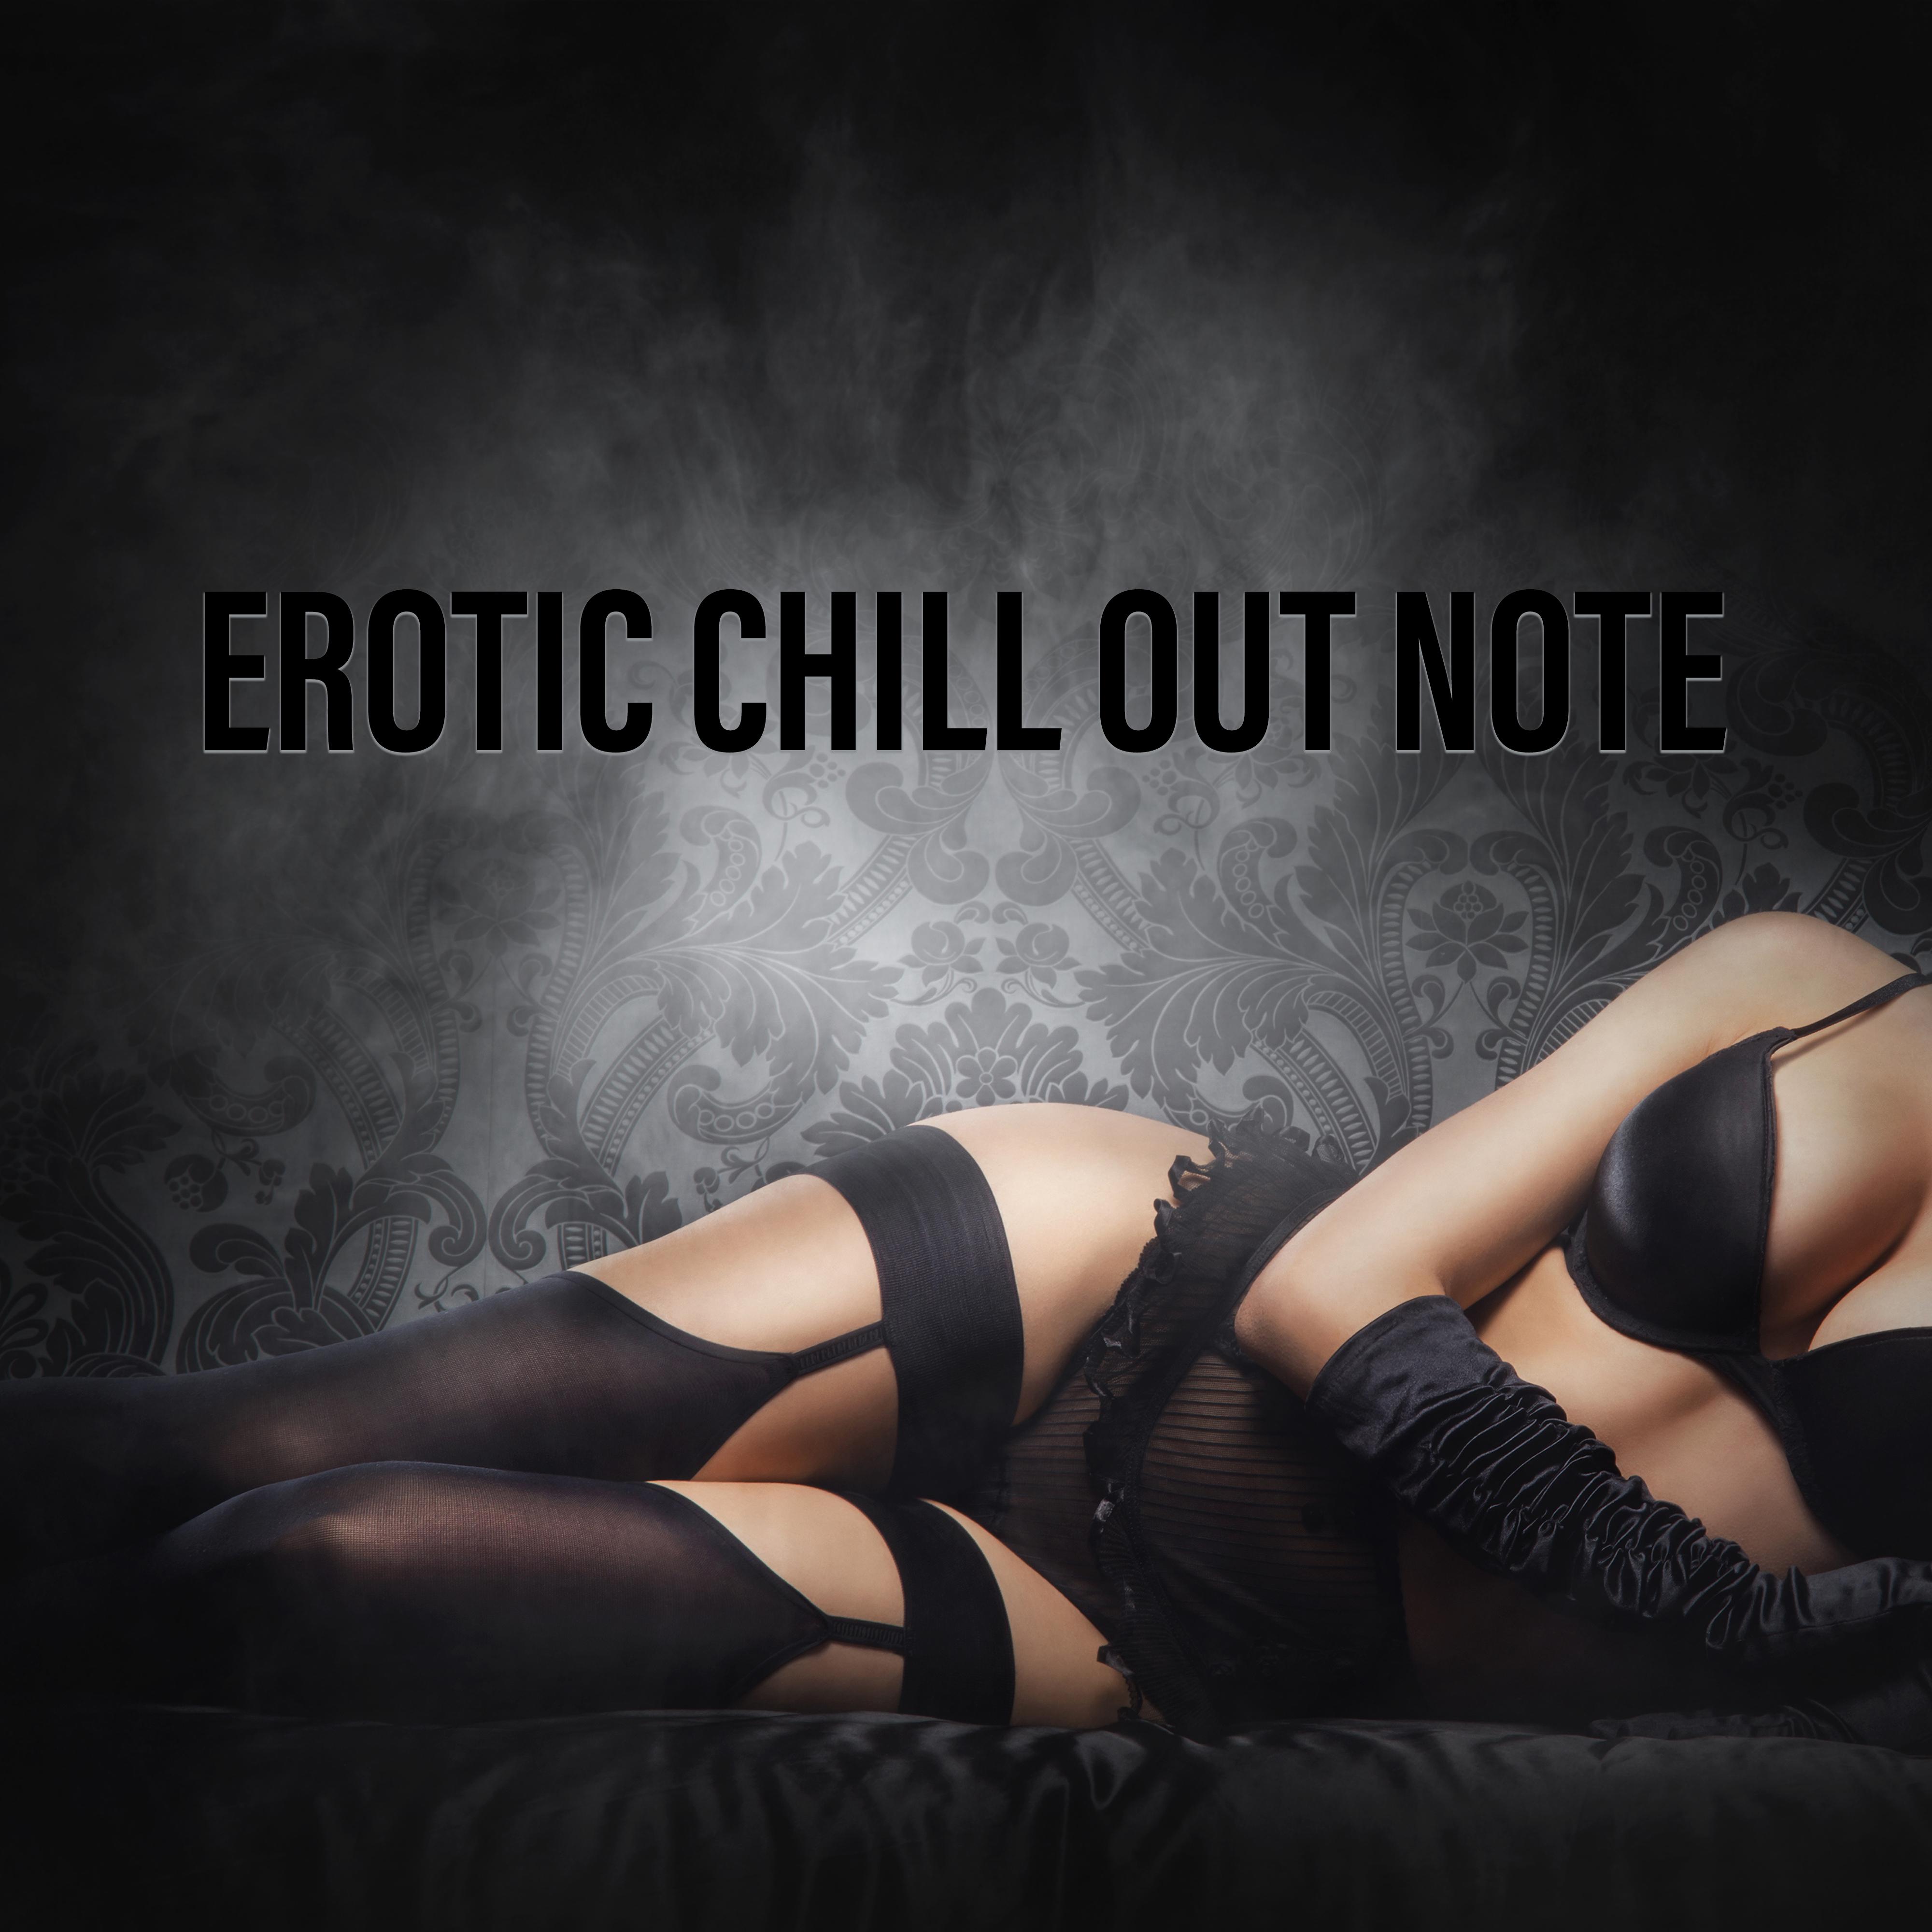 Erotic Chill Out Note